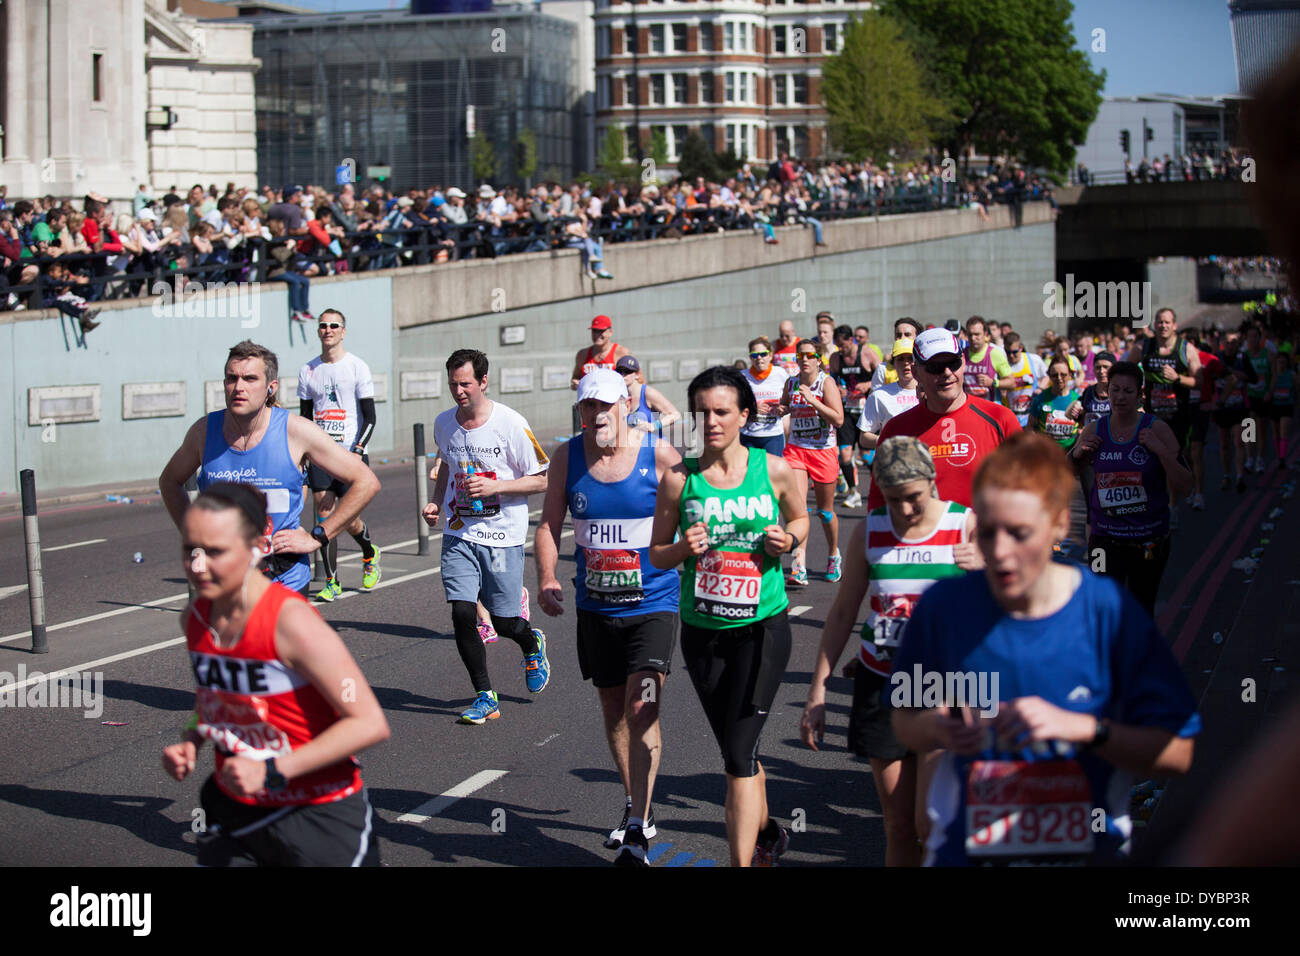 London, UK. 13th Apr, 2014. Competitors running in the main public event of the Virgin Money London Marathon 2014. These runners take part and raise huge sums fo money for charity organisations. Credit:  Michael Kemp/Alamy Live News Stock Photo